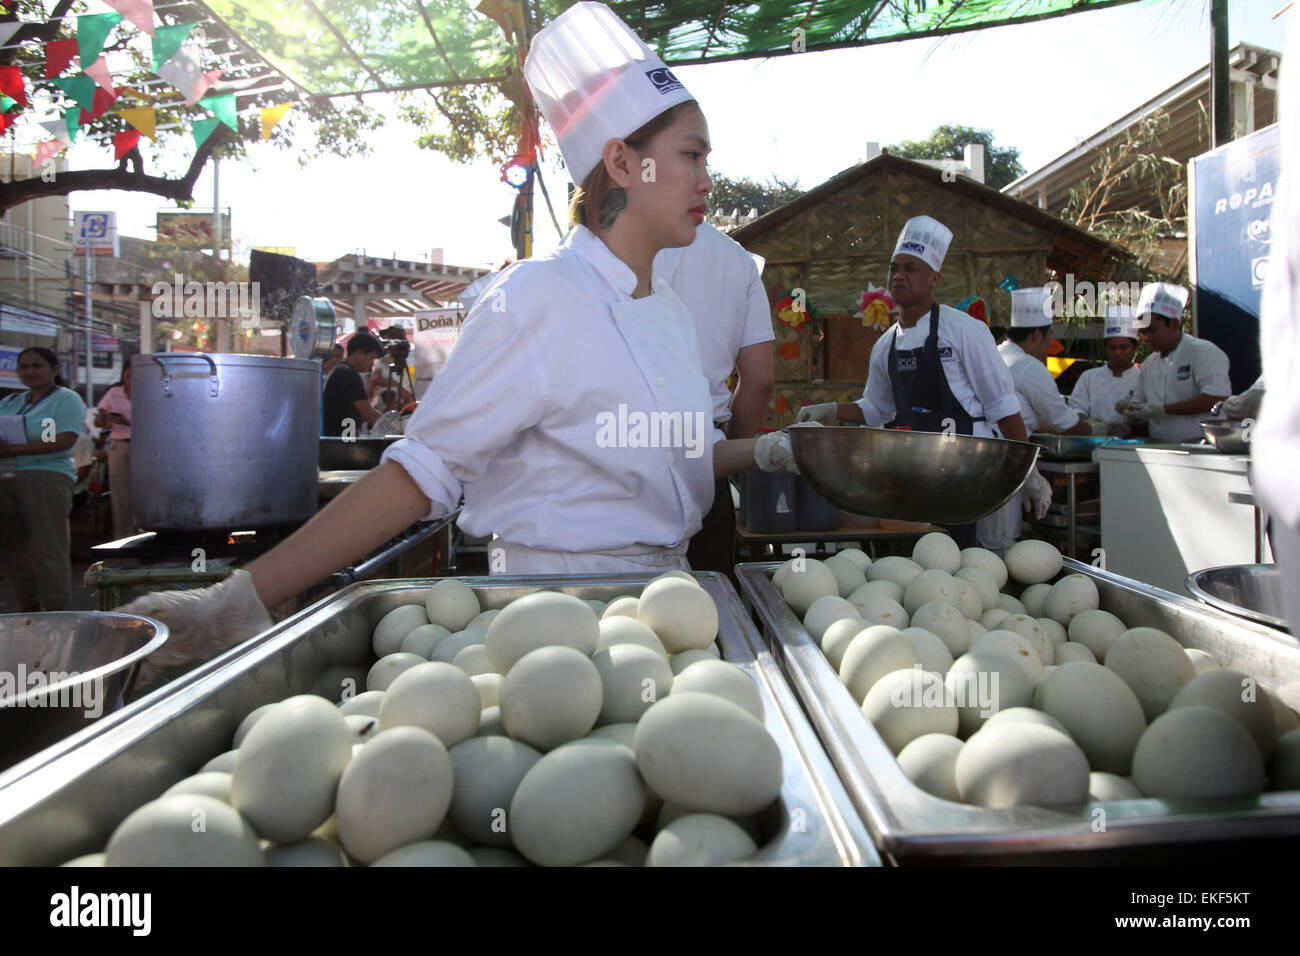 Pateros Municipality, Philippines. 10th Apr, 2015. Chefs prepare hard-boiled duck eggs, locally known as 'balut', as they attempt to make a Guinness World Record for the 'largest serving of balut' in Pateros Municipality, the Philippines, April 10, 2015. The eggs were cooked into a 'Balut Adobo' which weighed a total of 117.5 kilograms, successfully setting a new Guinness World Record. © Rouelle Umali/Xinhua/Alamy Live News Stock Photo